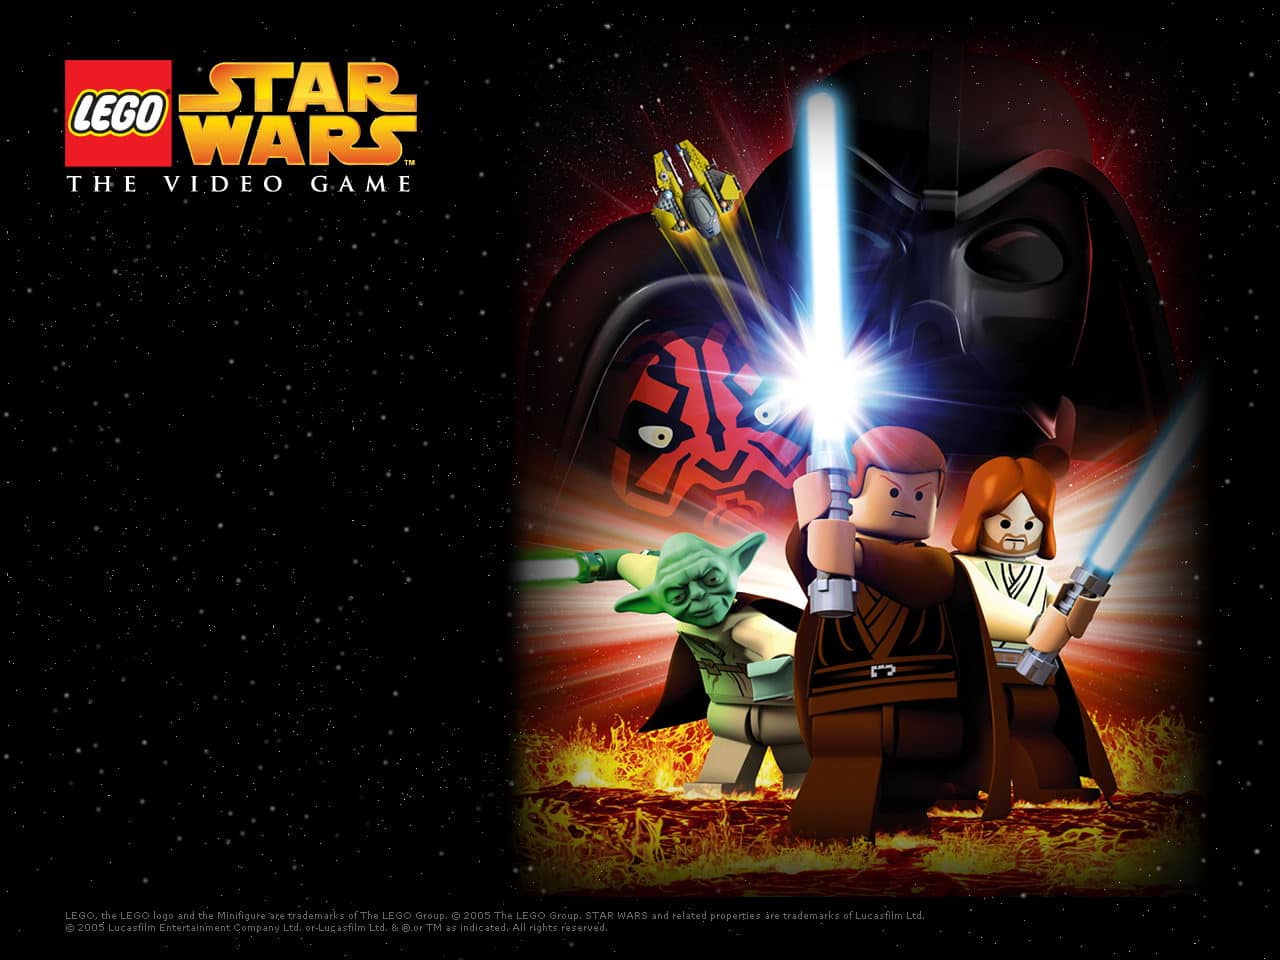 Lego Star Wars cheat codes for characters and other unlockables